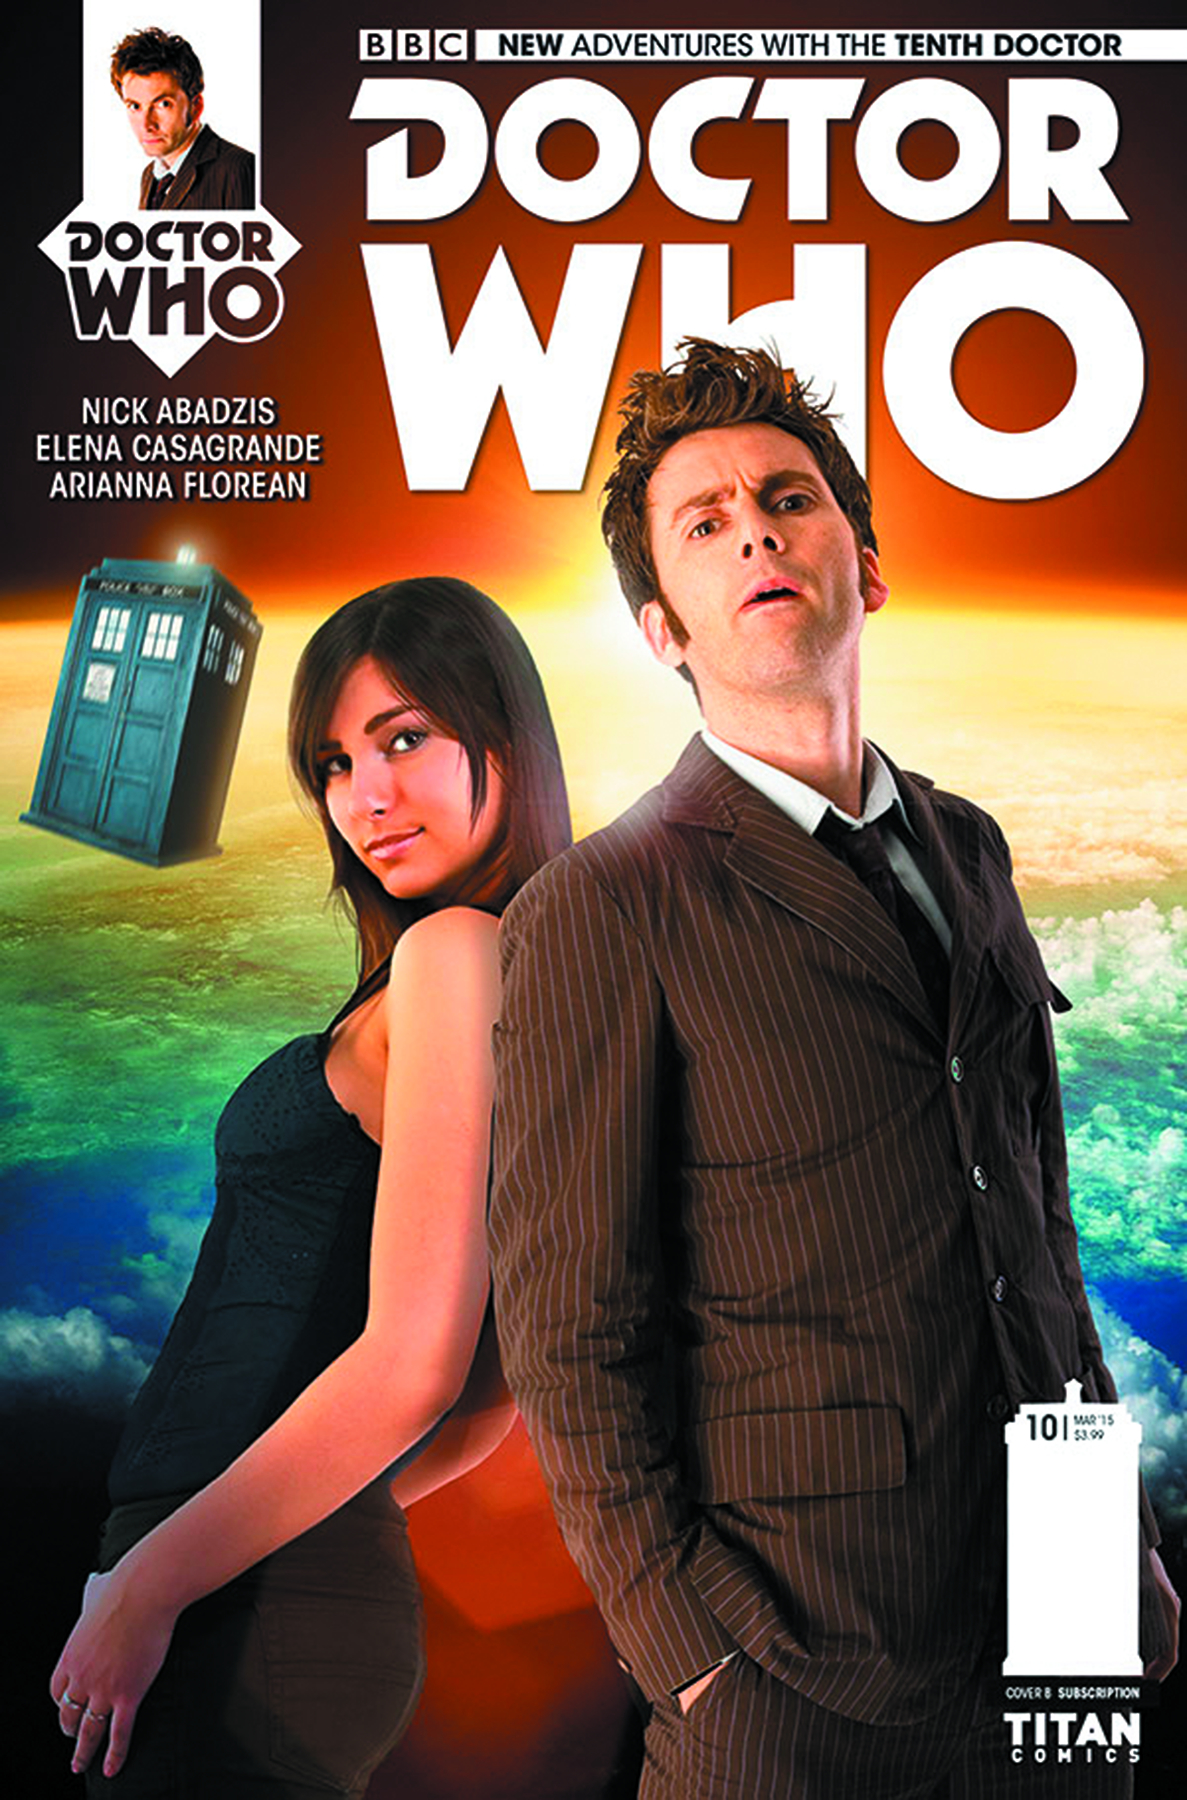 DOCTOR WHO 10TH #10 SUBSCRIPTION PHOTO